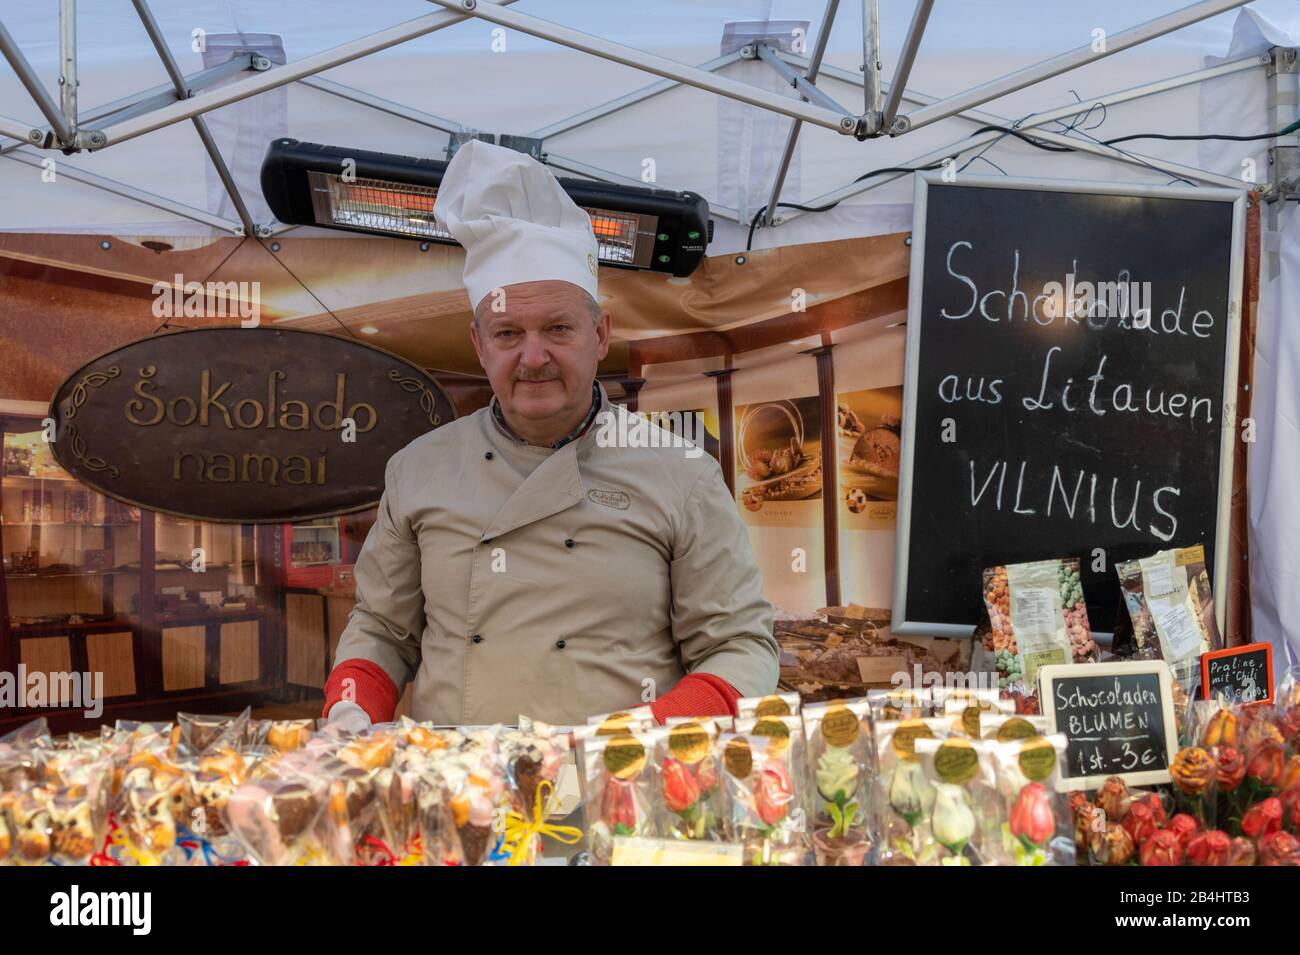 Germany, Saxony-Anhalt, Wernigerode, chocolate manufacturer from Vilnus, Lithuania, guests at the Chocolate Festival Wernigerode, Harz. Stock Photo